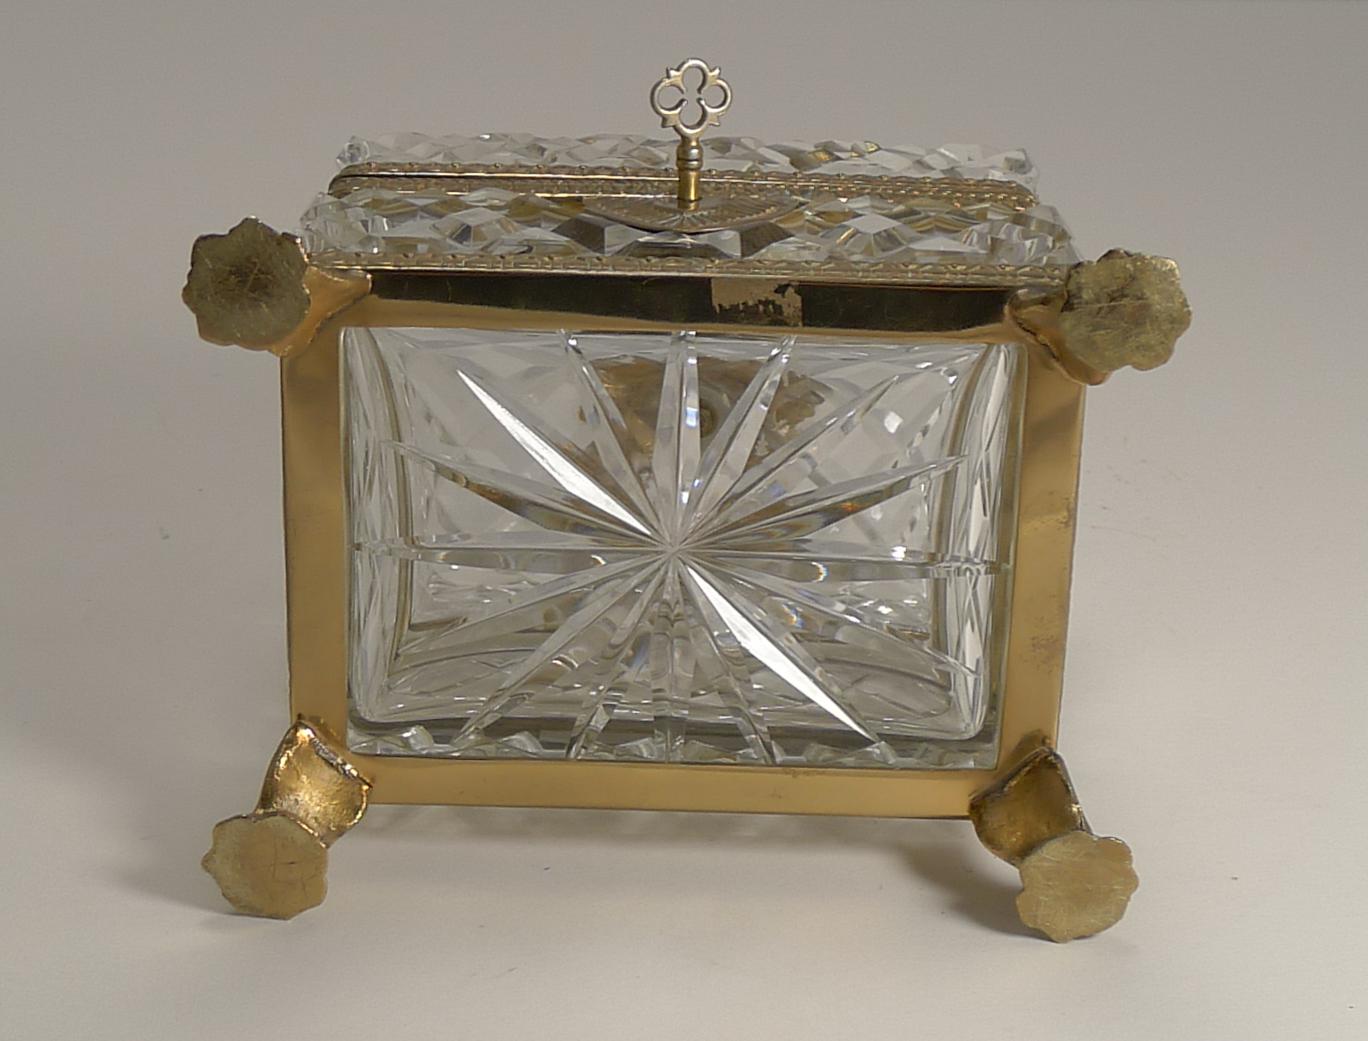 Early 20th Century Figural French Cut Crystal and Gilded Bronze Jewelry Casket or Box, circa 1900